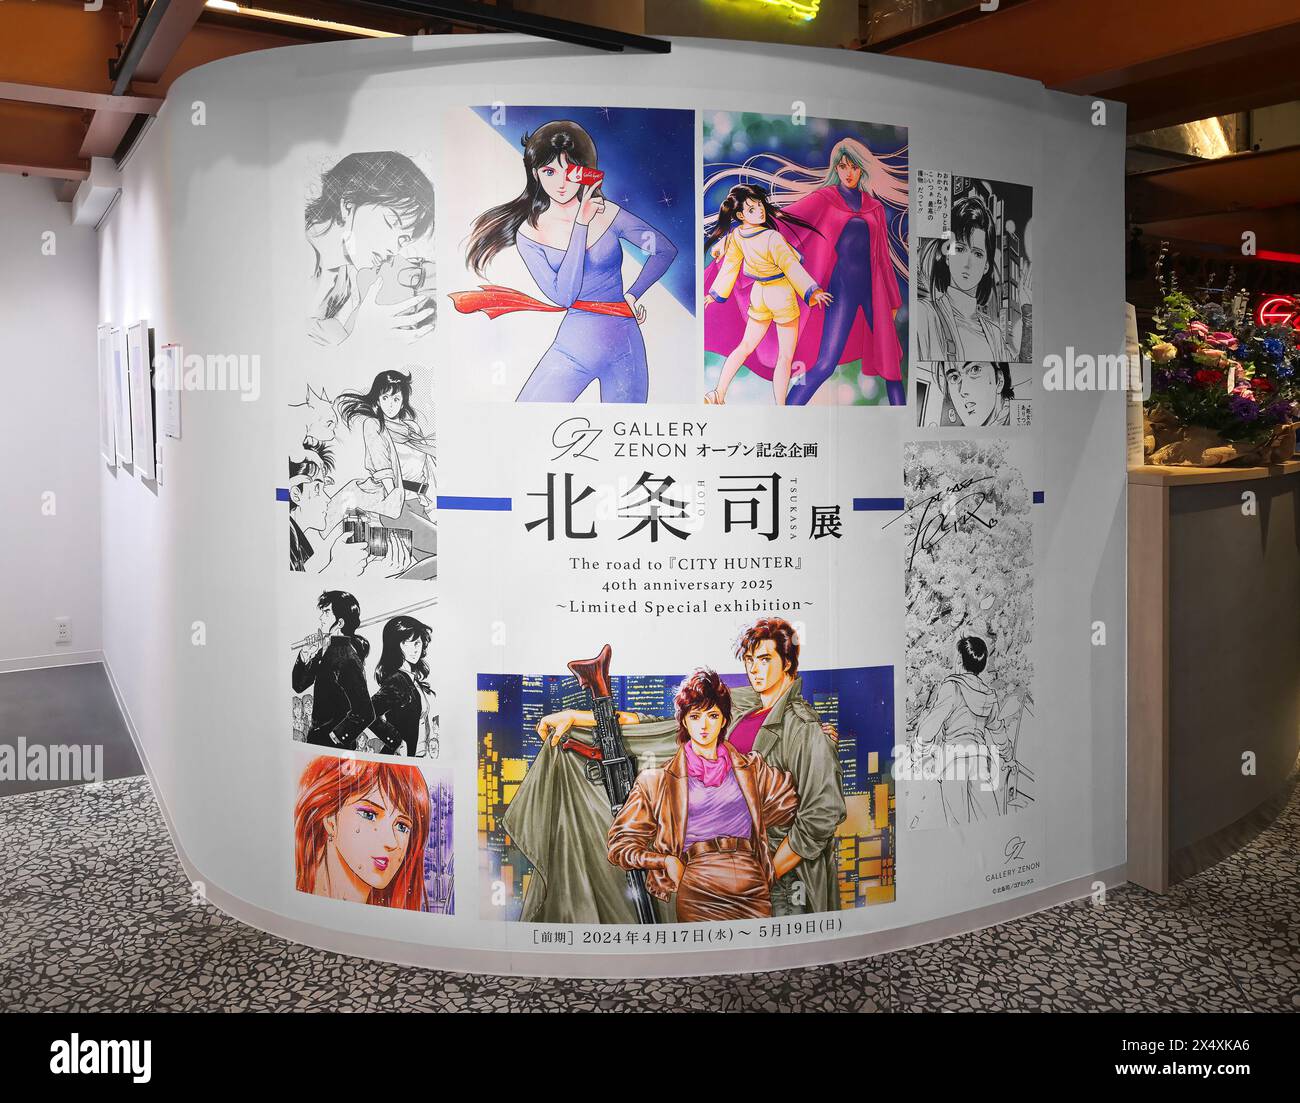 tokyo, japan - apr 25 2024: Entrance of the Tsukasa Hojo 40th Anniversary 2025 Limited Special Exhibition at Gallery Zenon featuring famous manga like Stock Photo